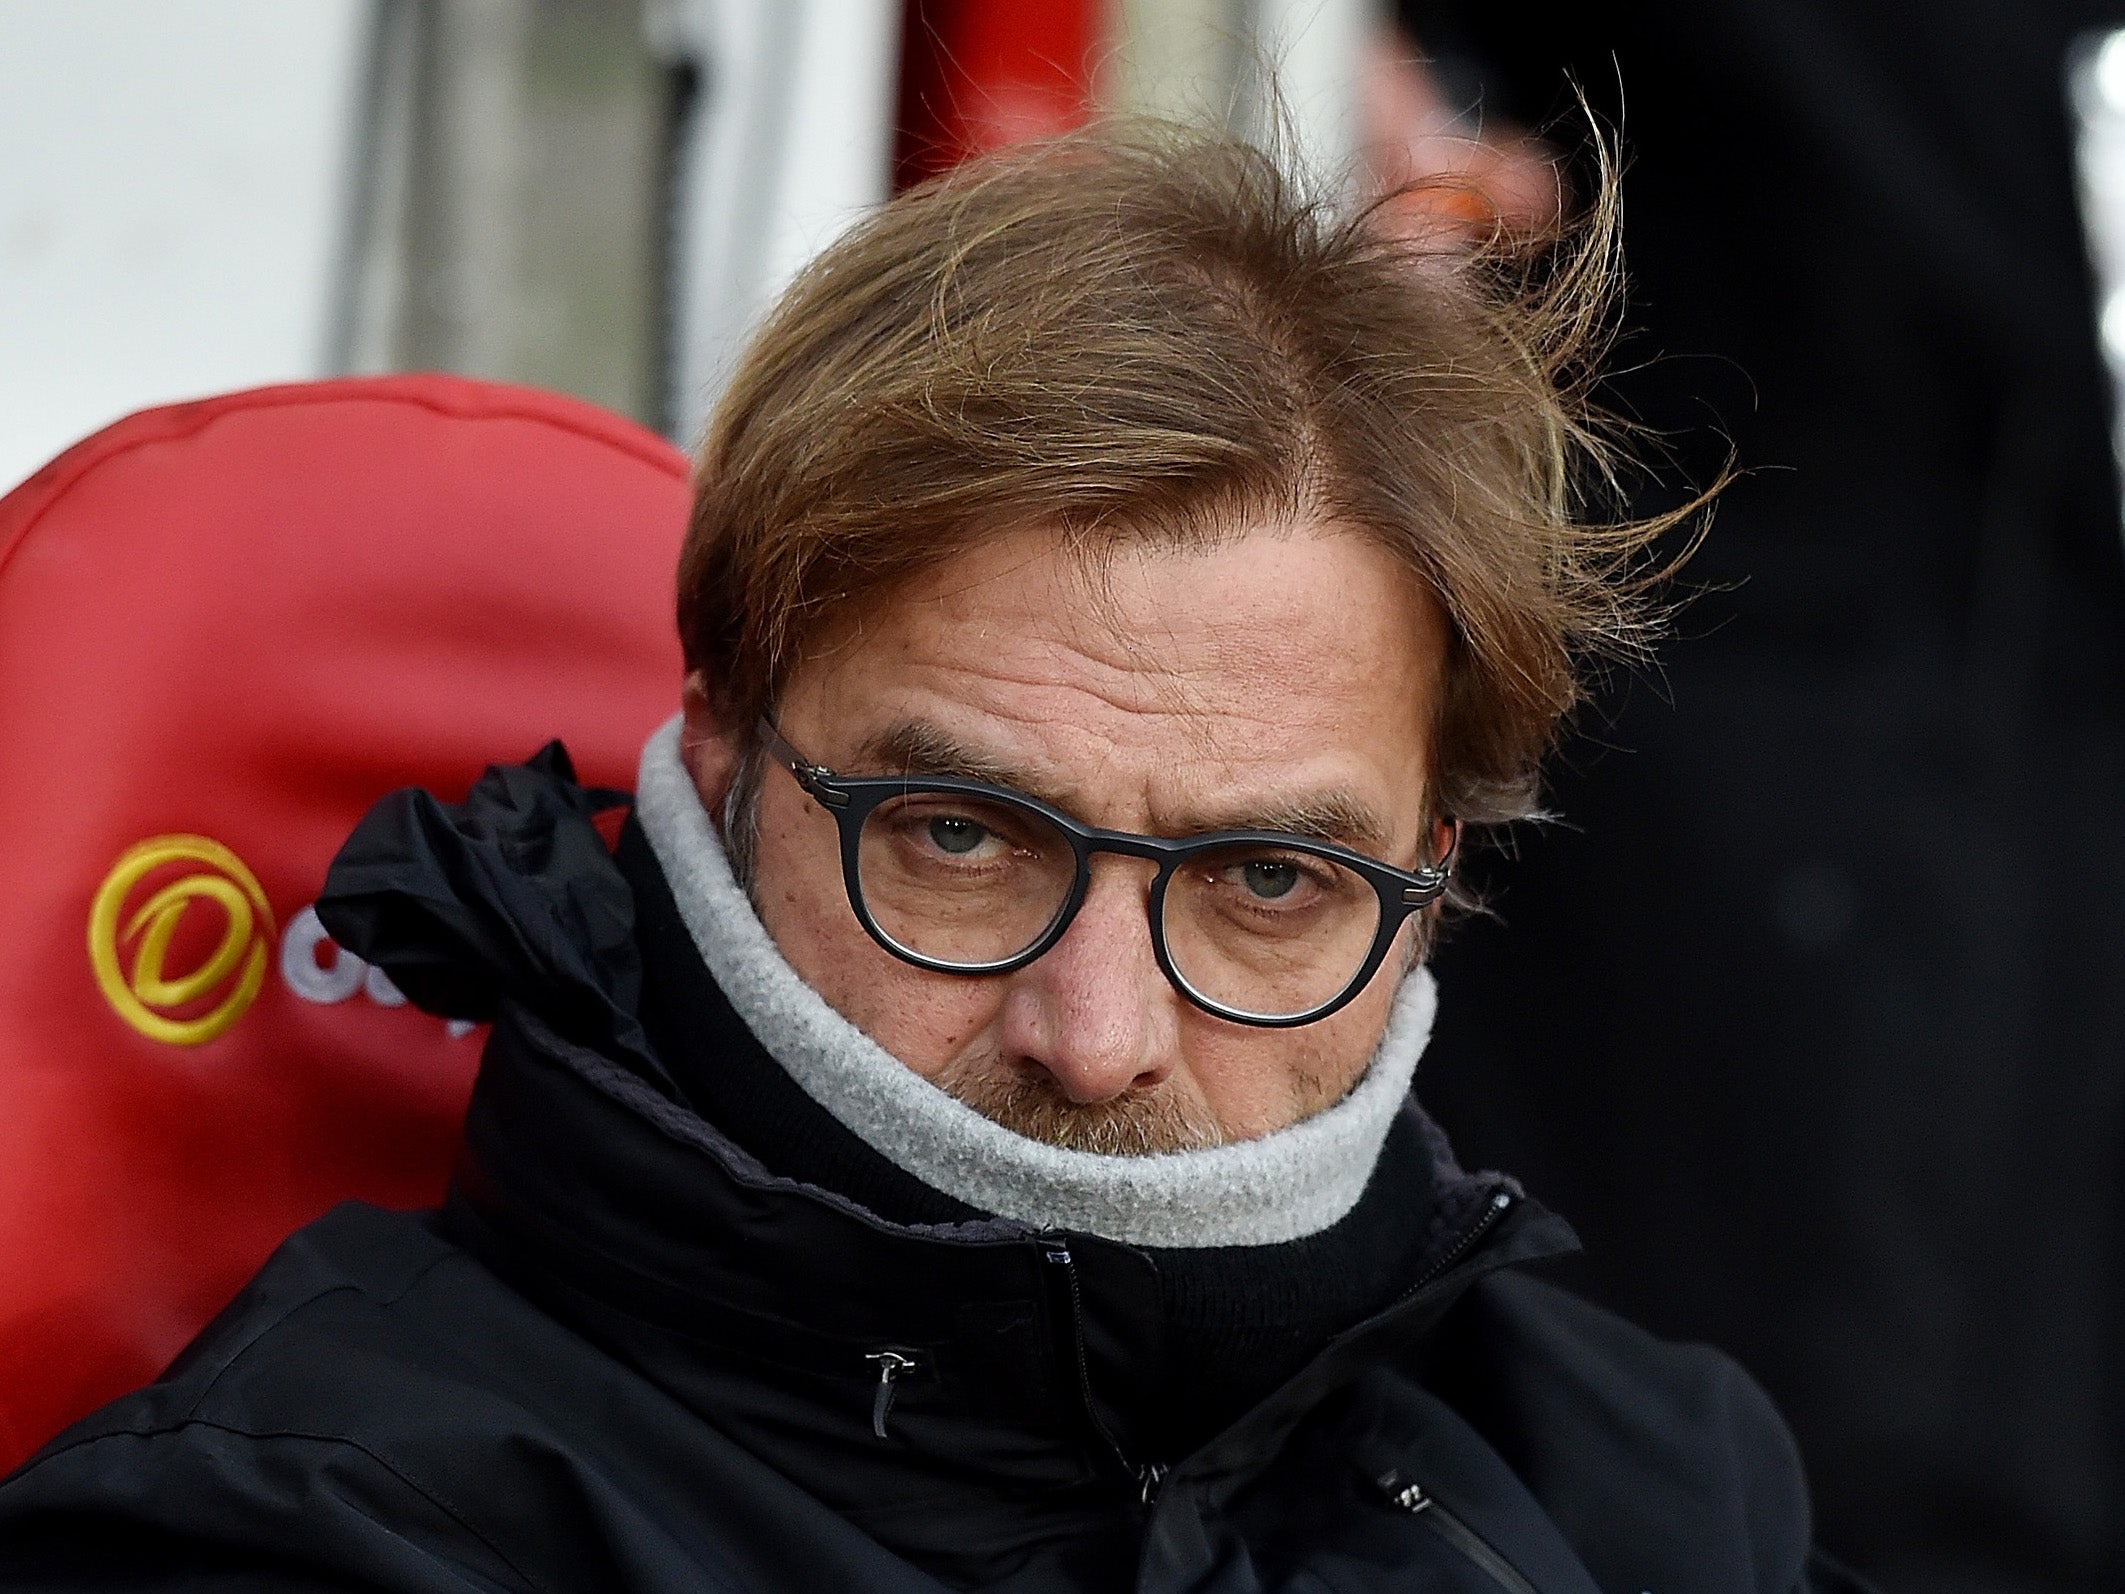 Klopp said the draw didn't mean they were out of the title race